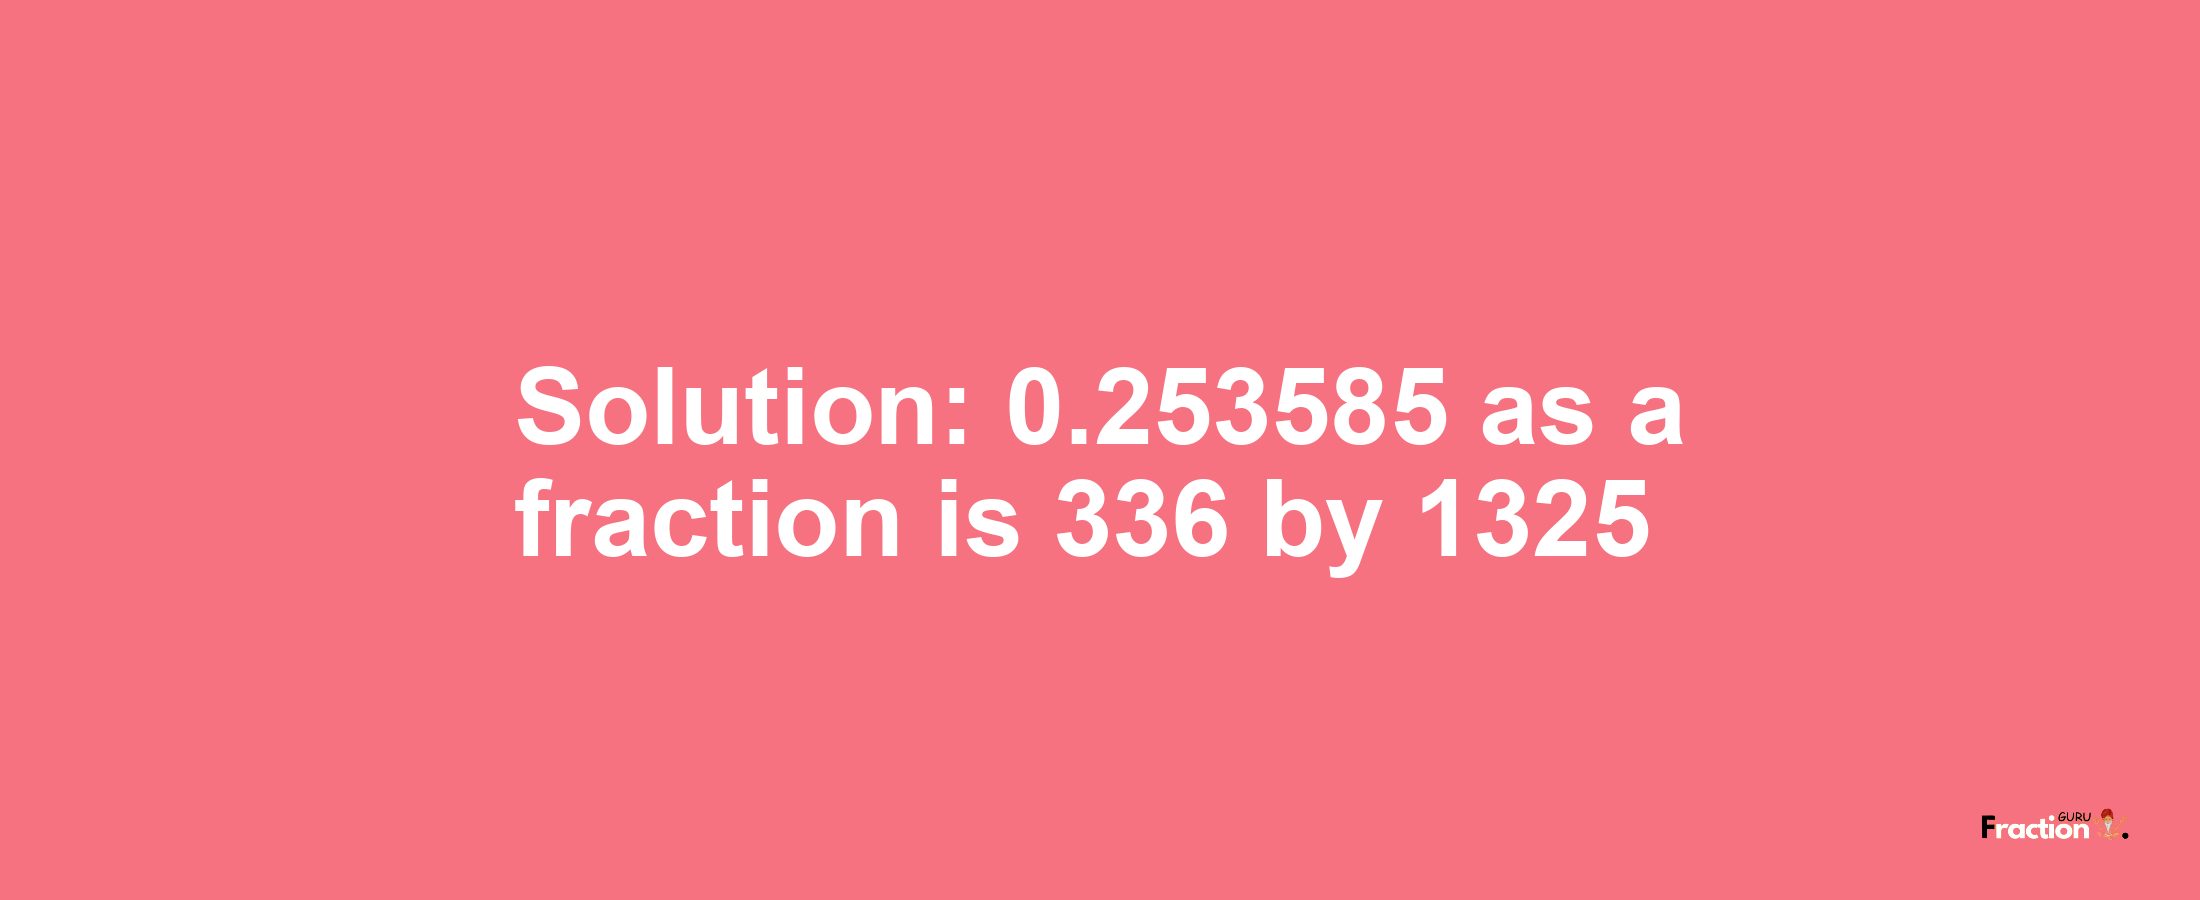 Solution:0.253585 as a fraction is 336/1325